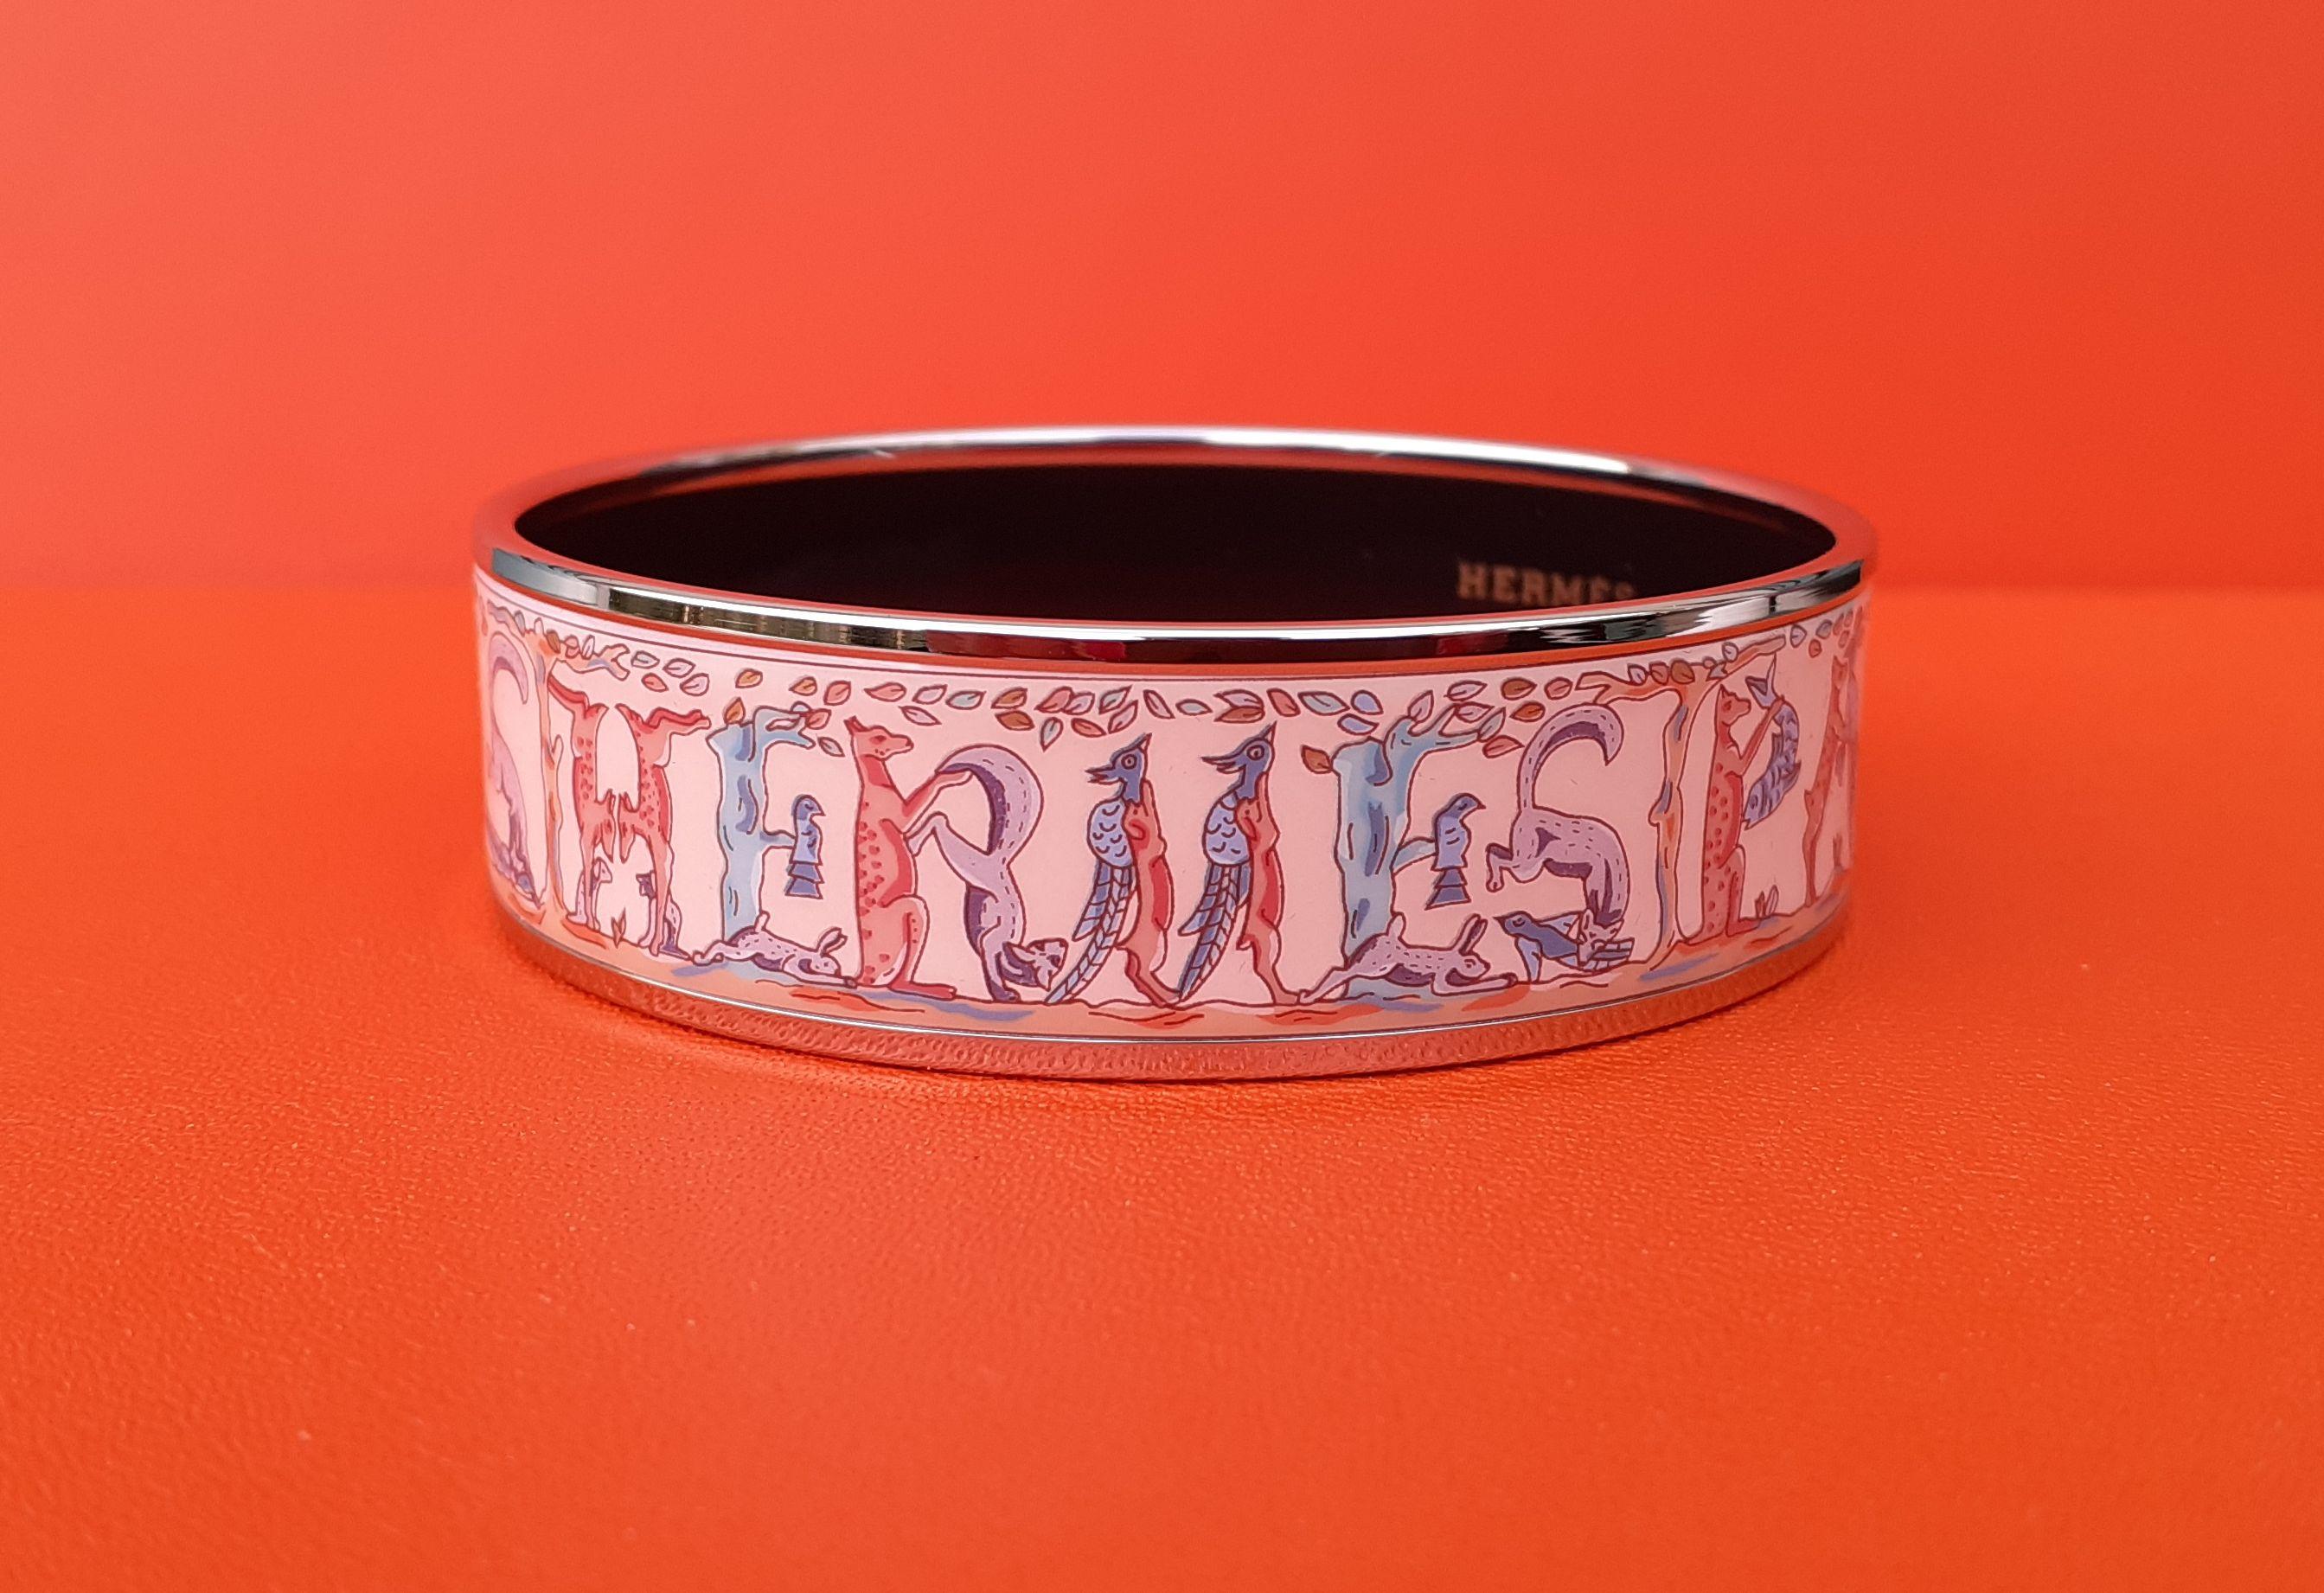 Beautiful Authentic Hermès Bracelet

Print from the 